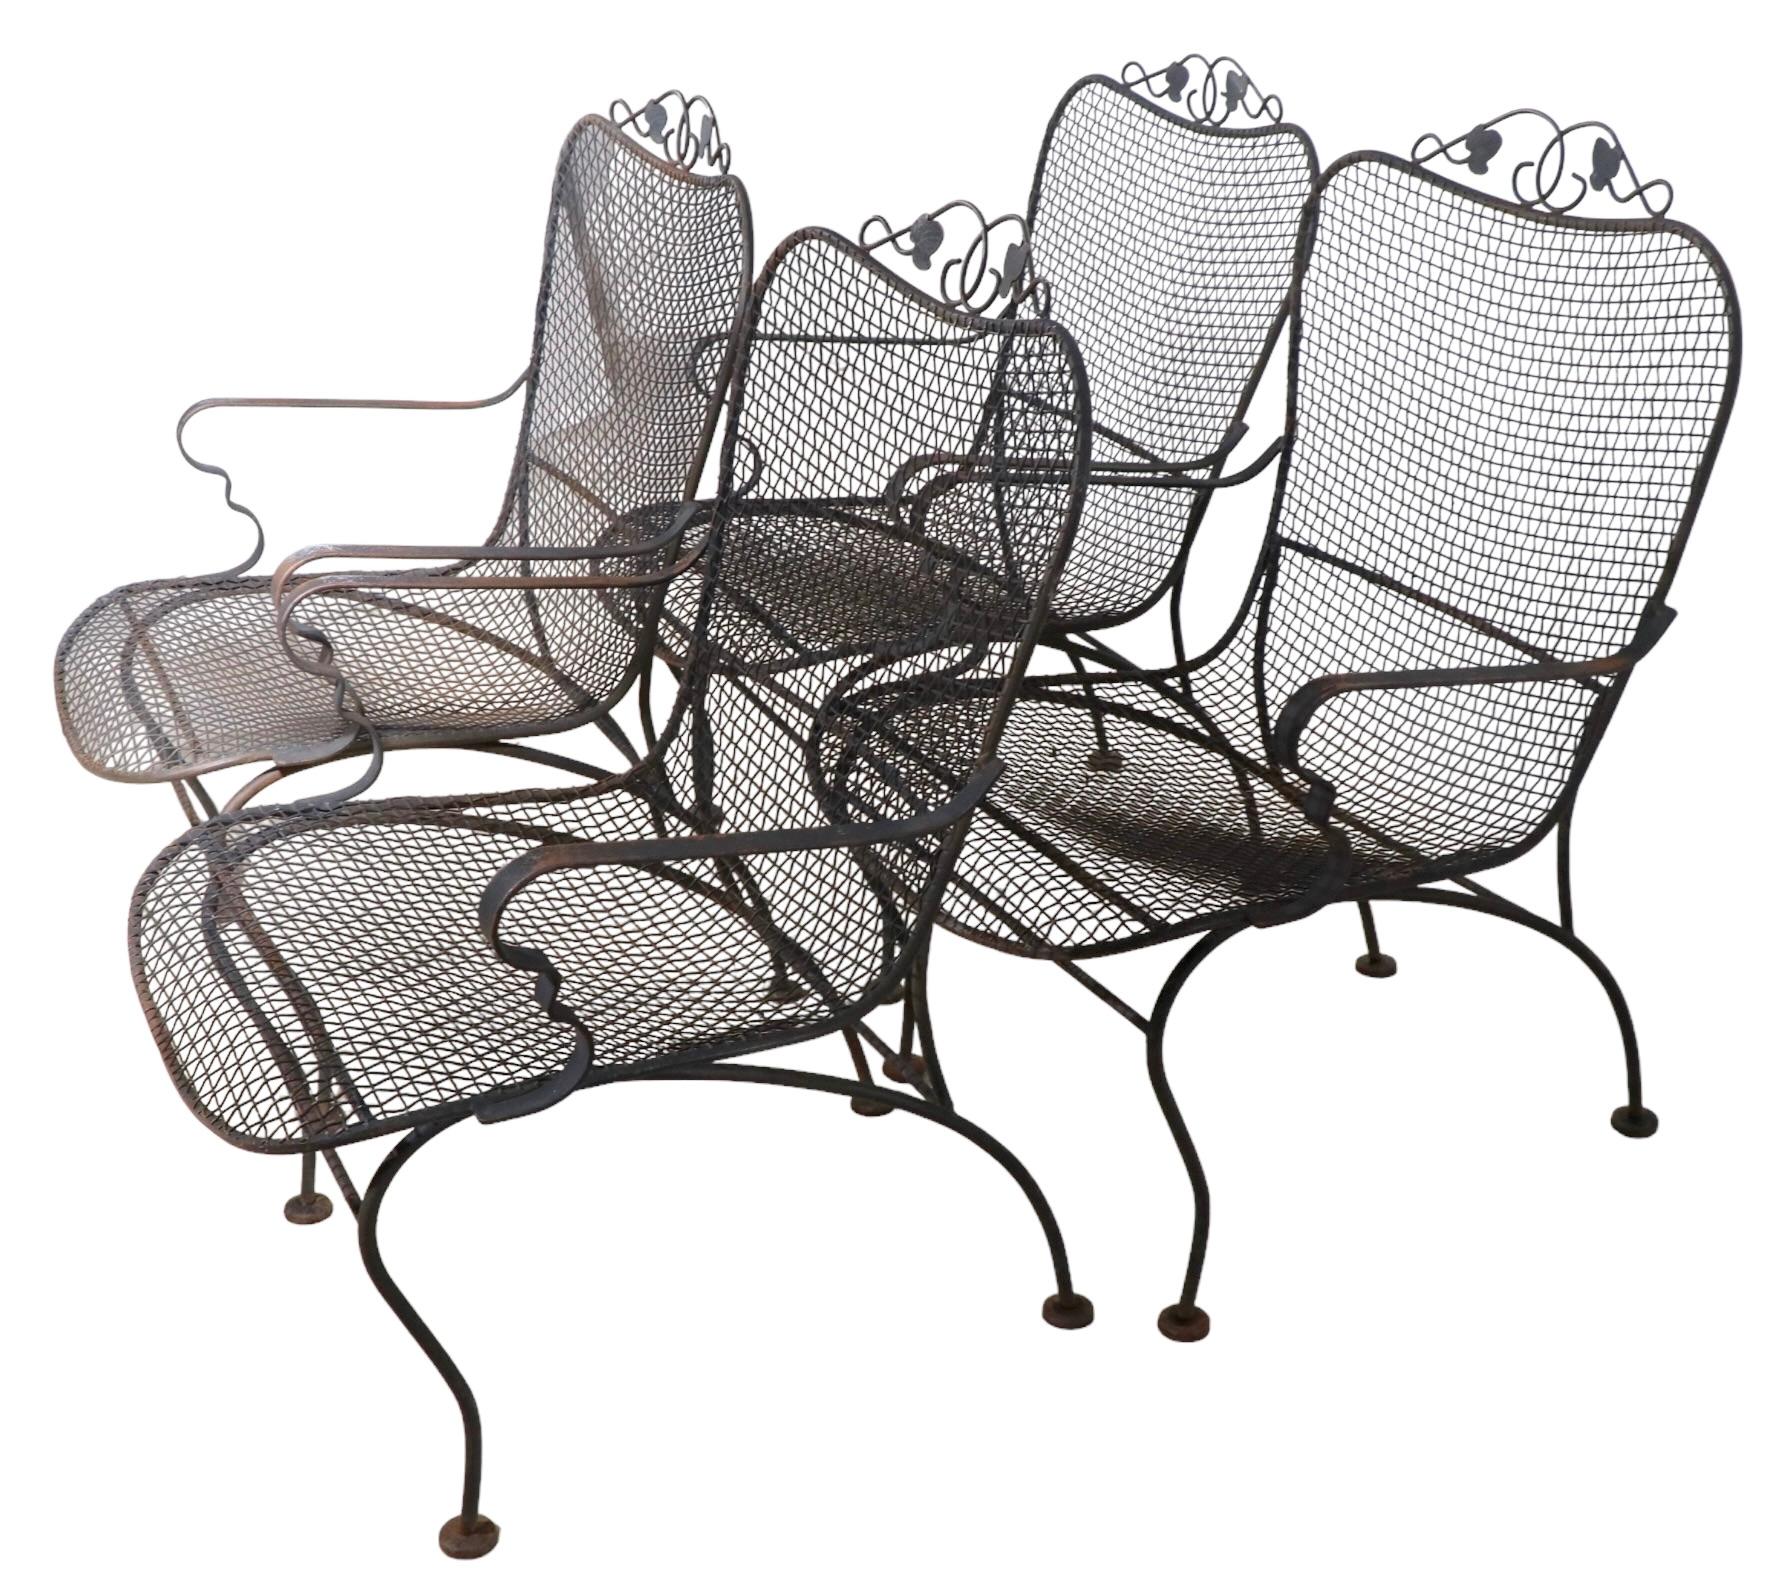 20th Century Set of Four Garden, Patio, Poolside Chairs by Woodard For Sale